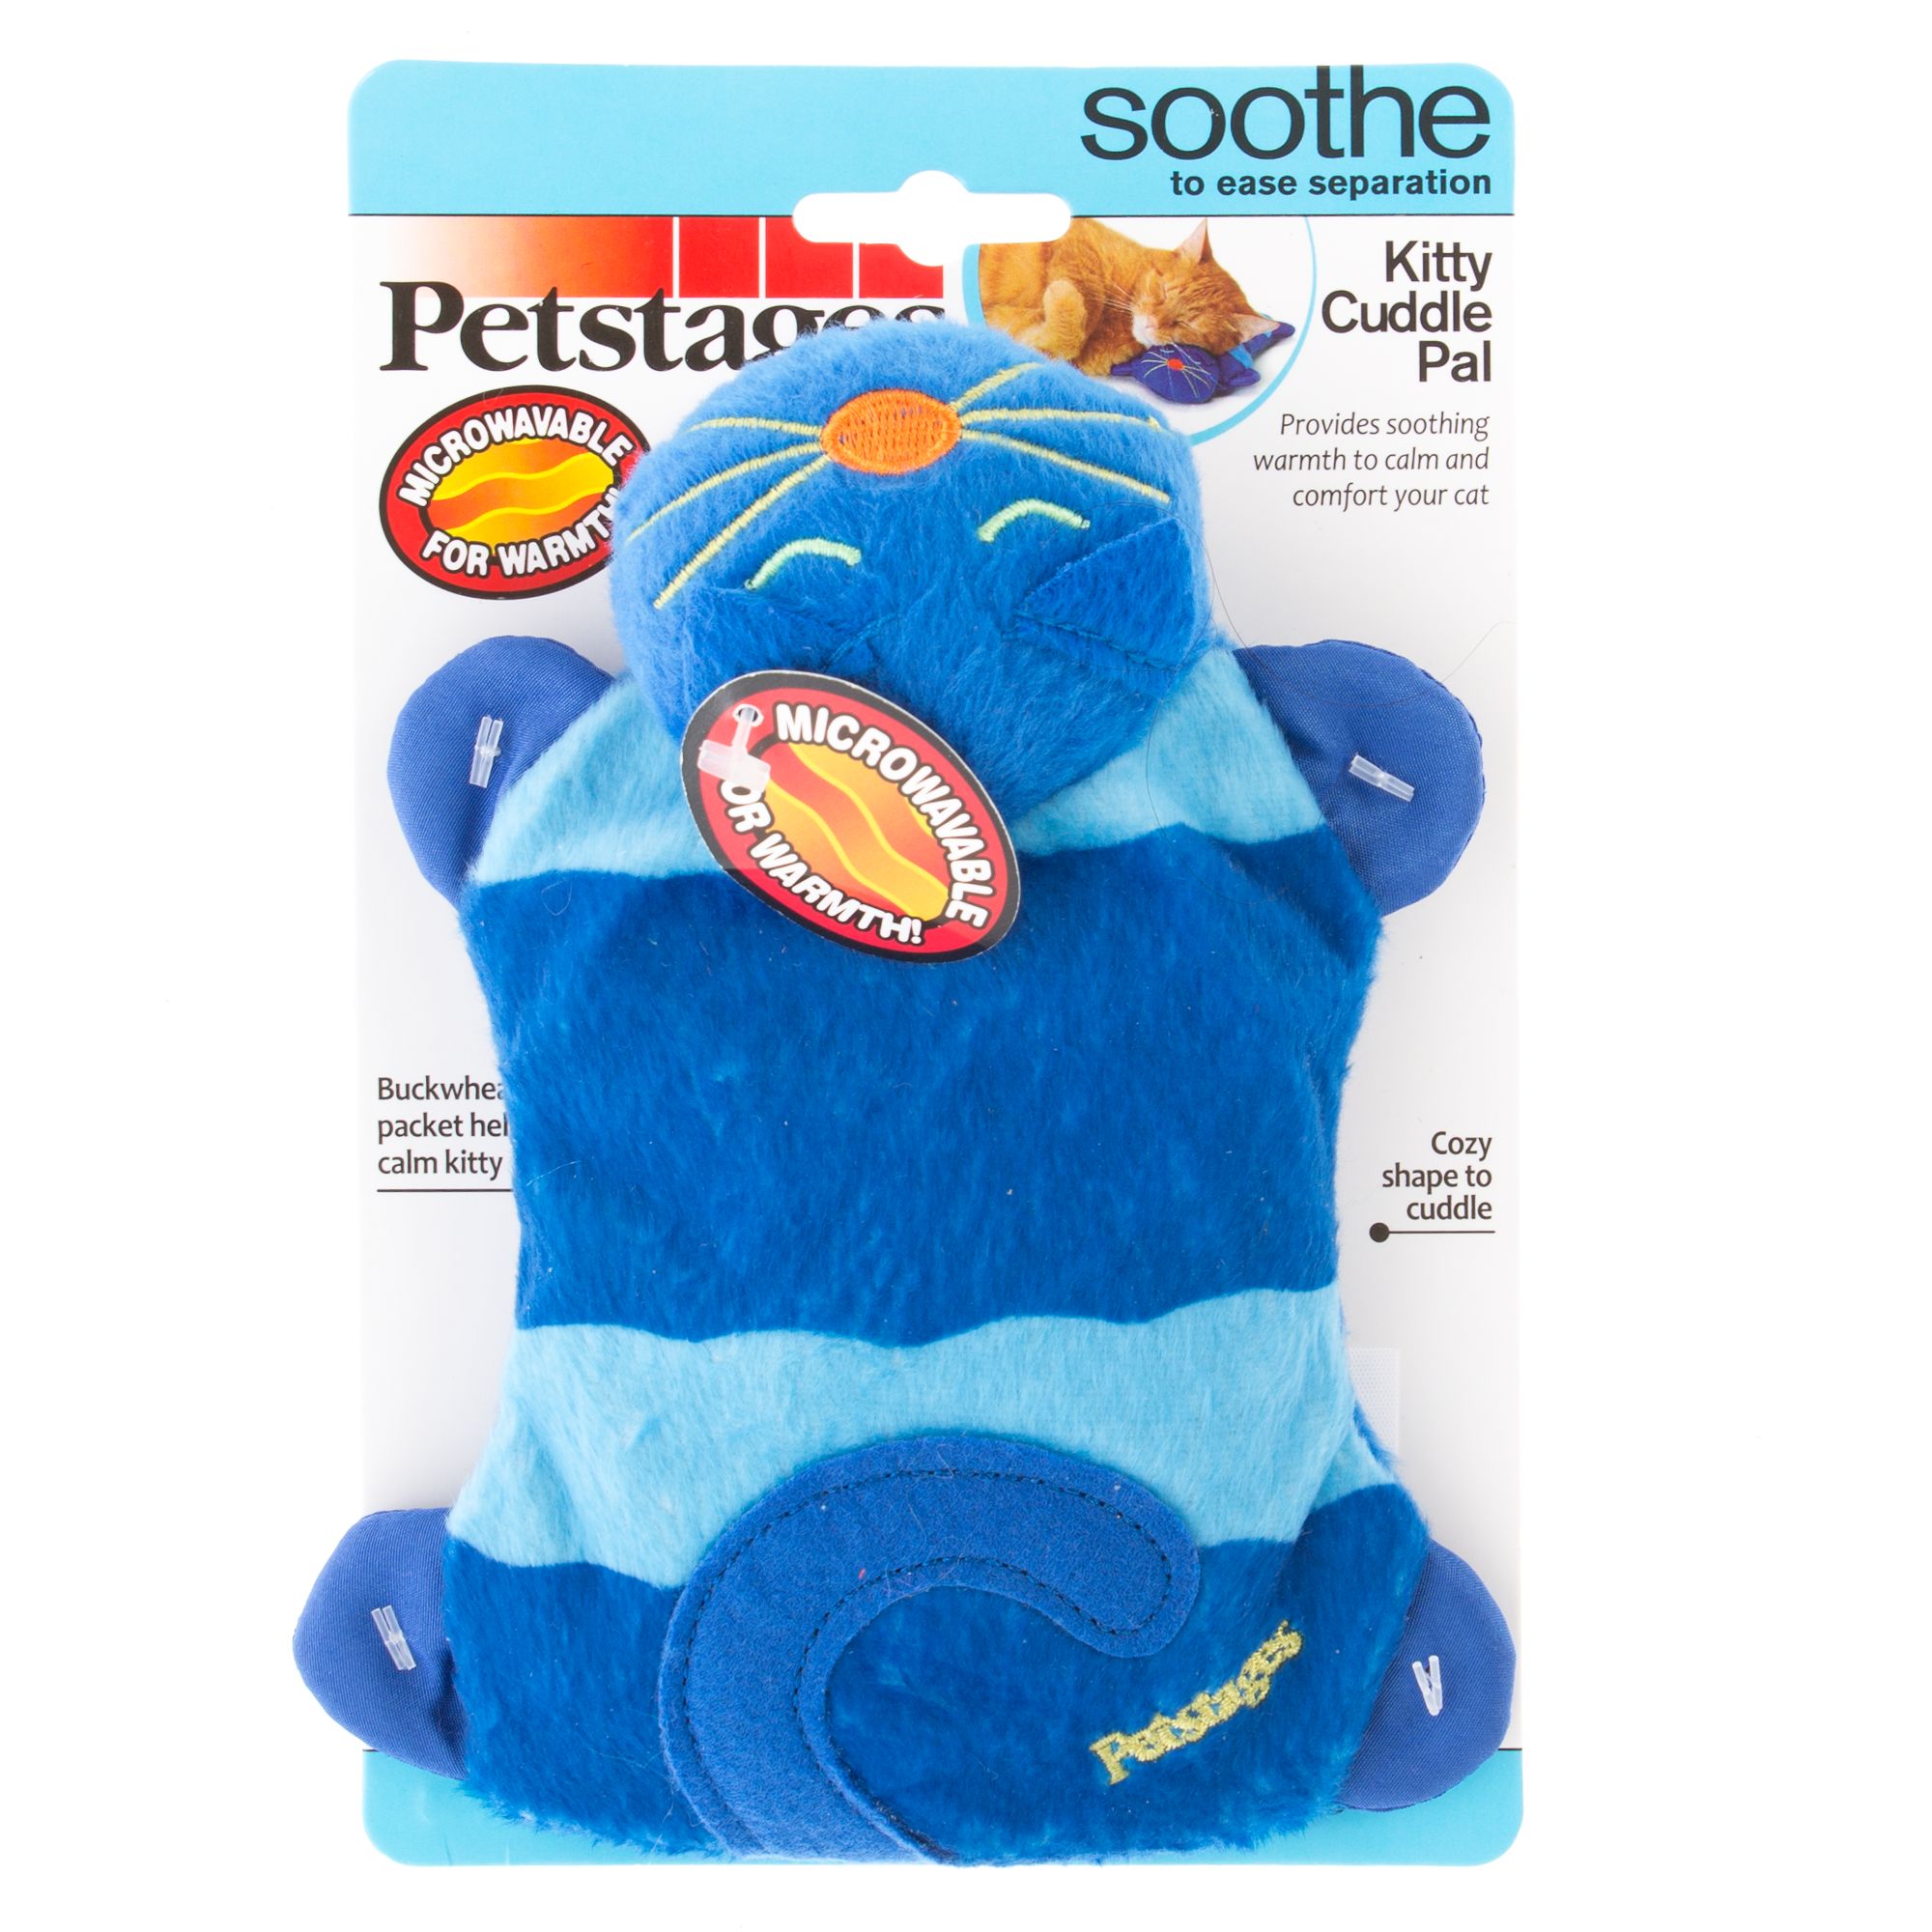 Petstages® Kitty Cuddle Pal Cat Toy 